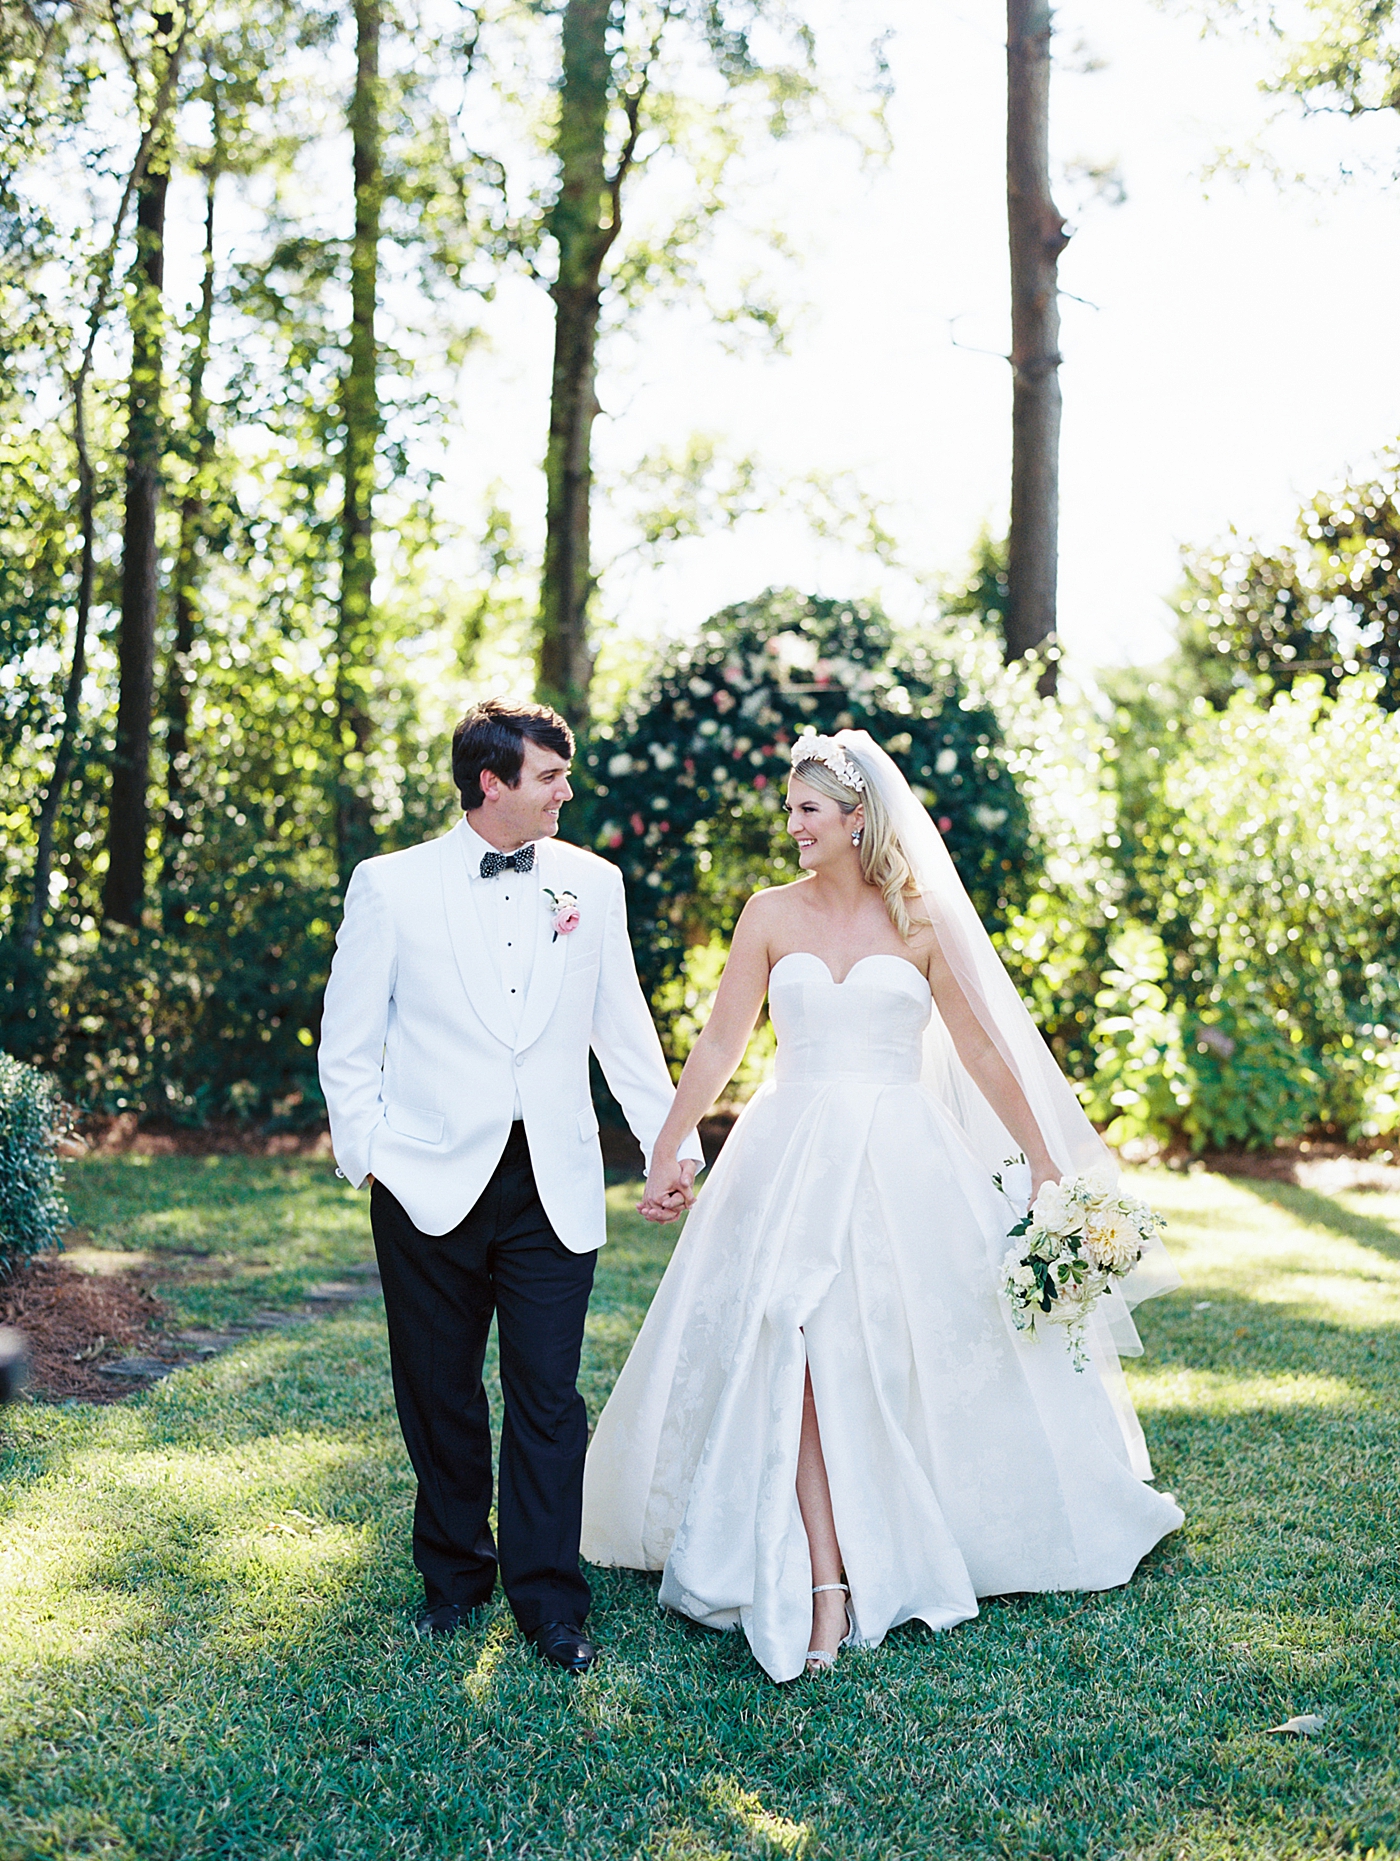 Bride and groom walking holding hands | Image by Annie Laura Photo